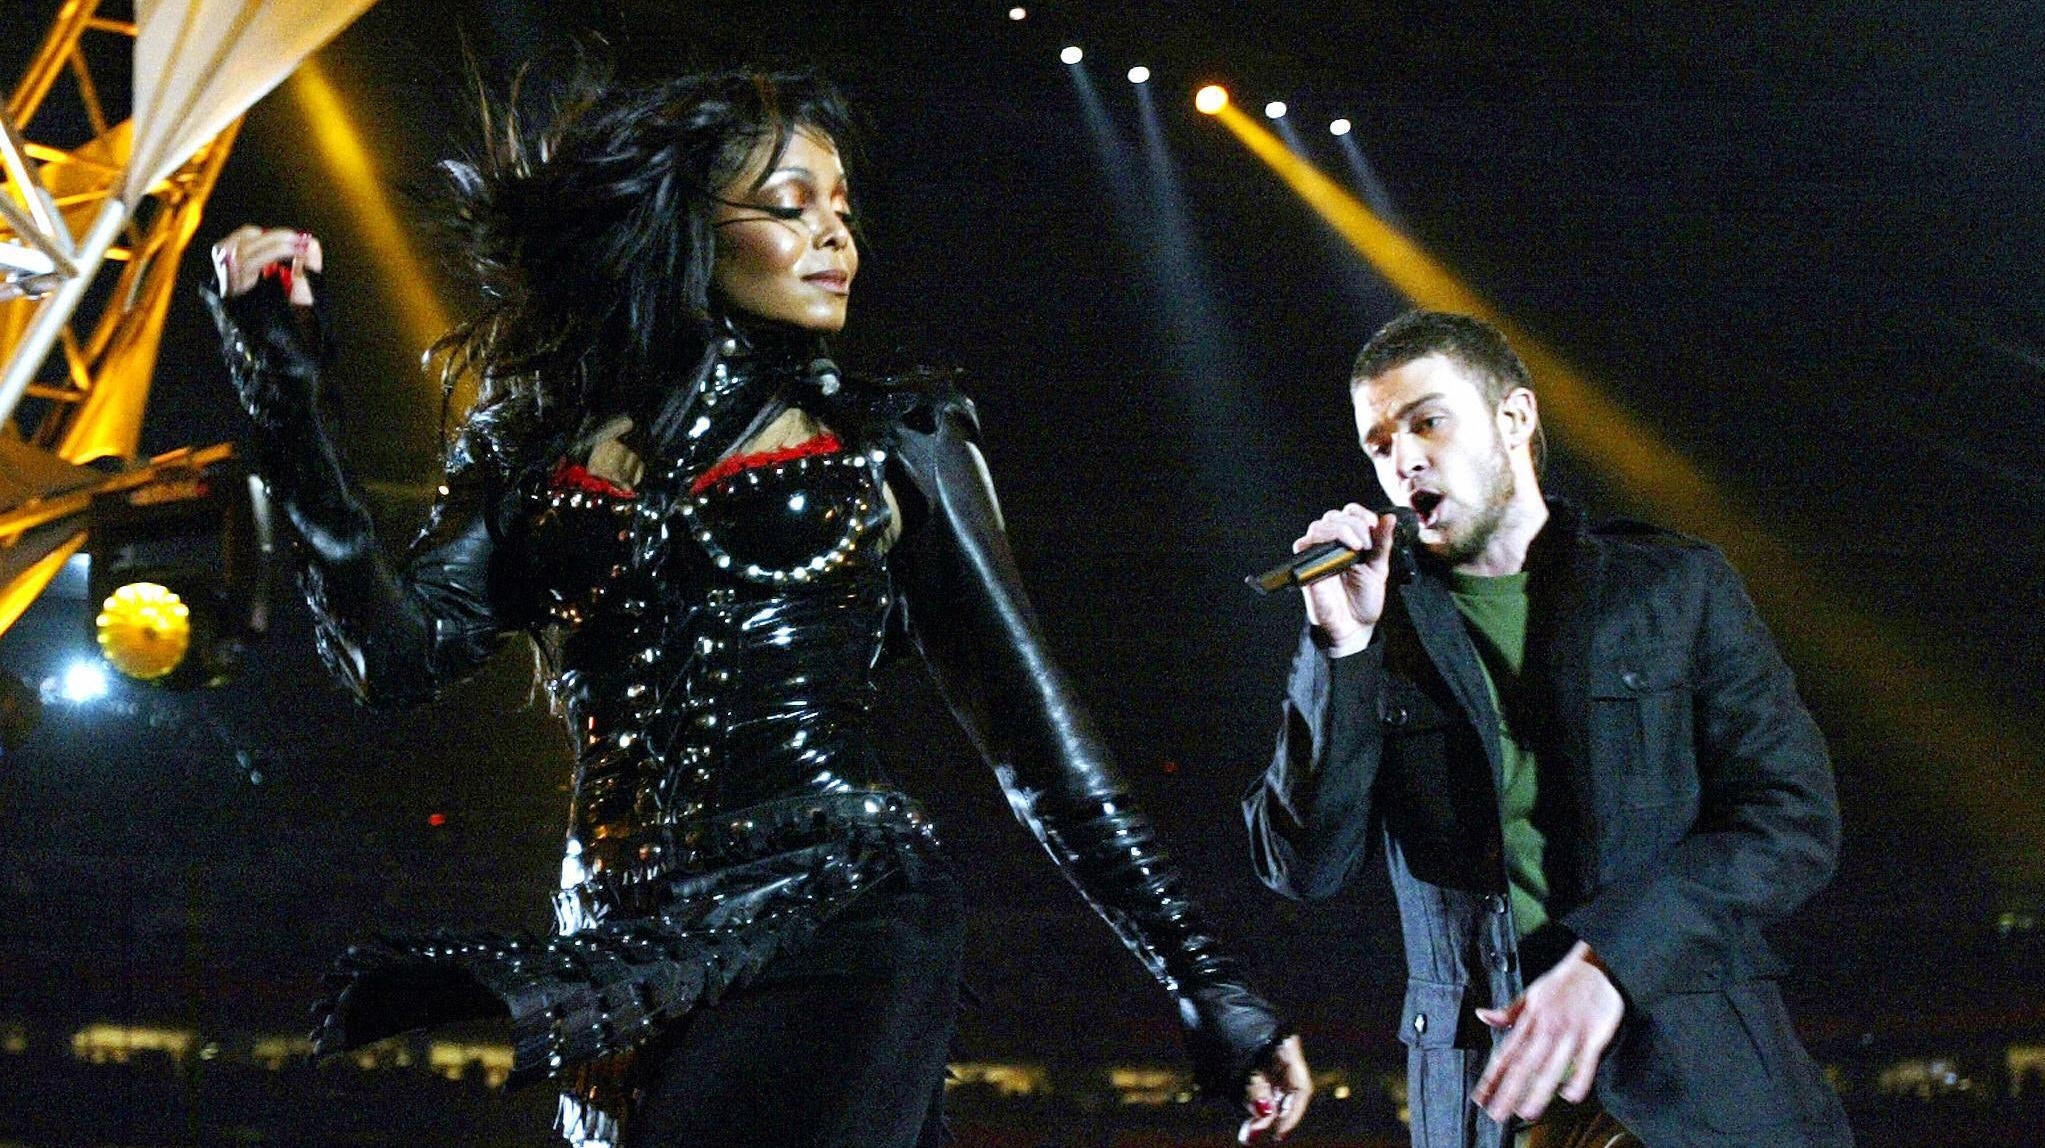 Janet Jackson says she told Justin Timberlake not to comment on the “wardrobe malfunction”